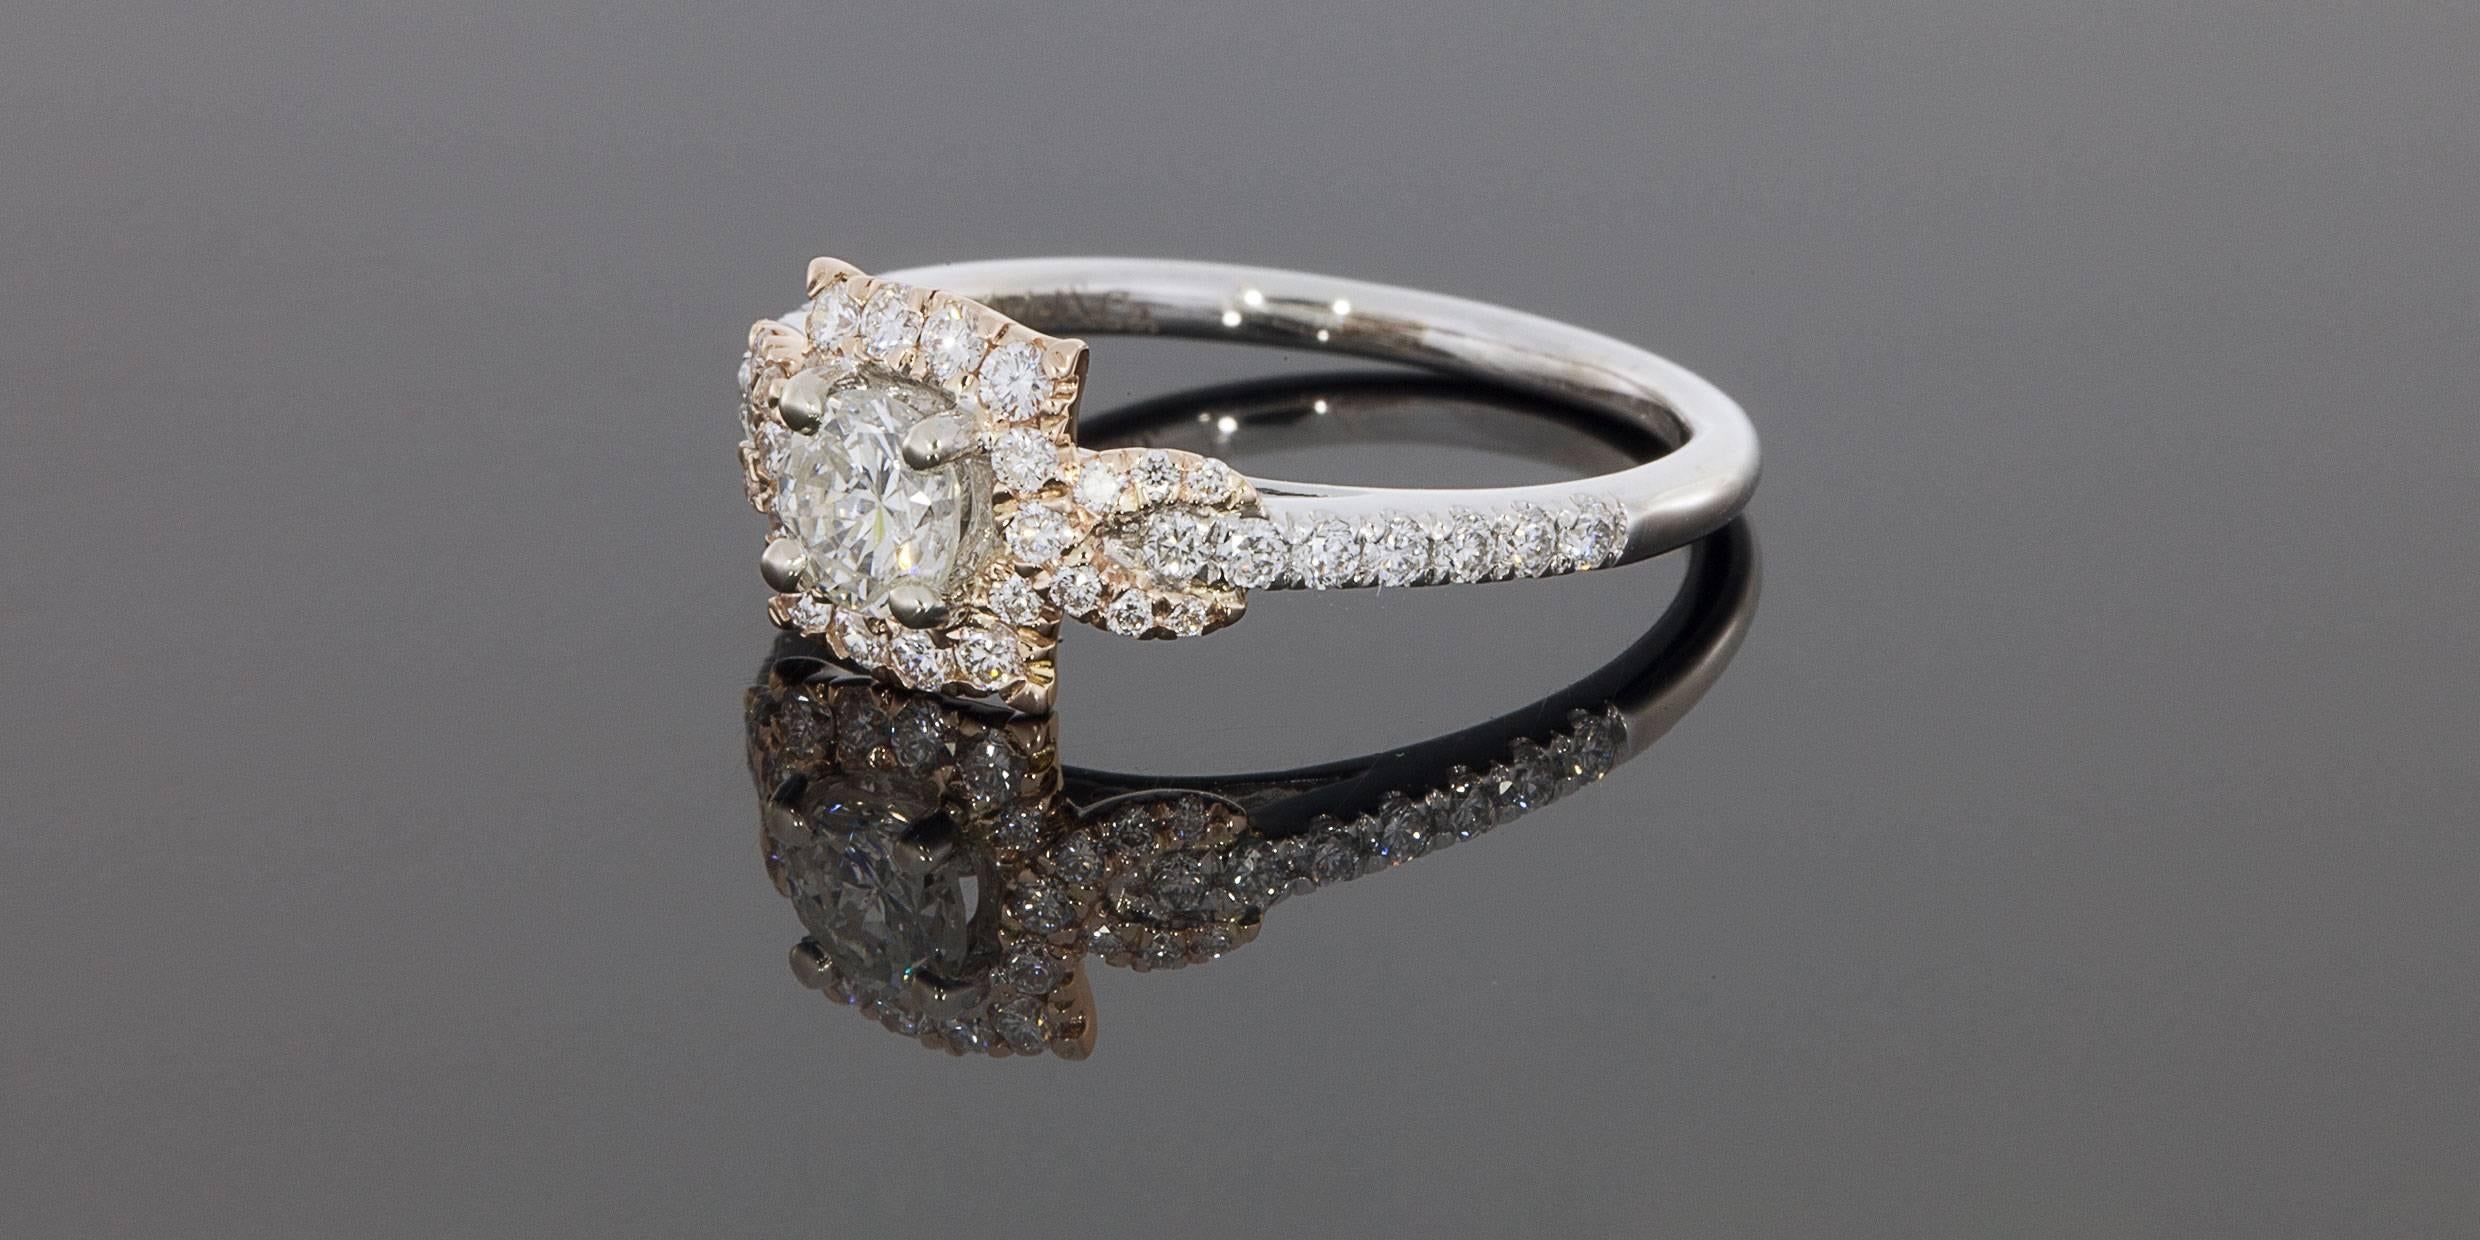 This beautiful rose & white gold engagement ring has a unique halo design that wraps or twists around the shank. The ring features .70 carat total weight in sparkly round brilliant diamonds. The center diamond is a .31 carat round brilliant cut